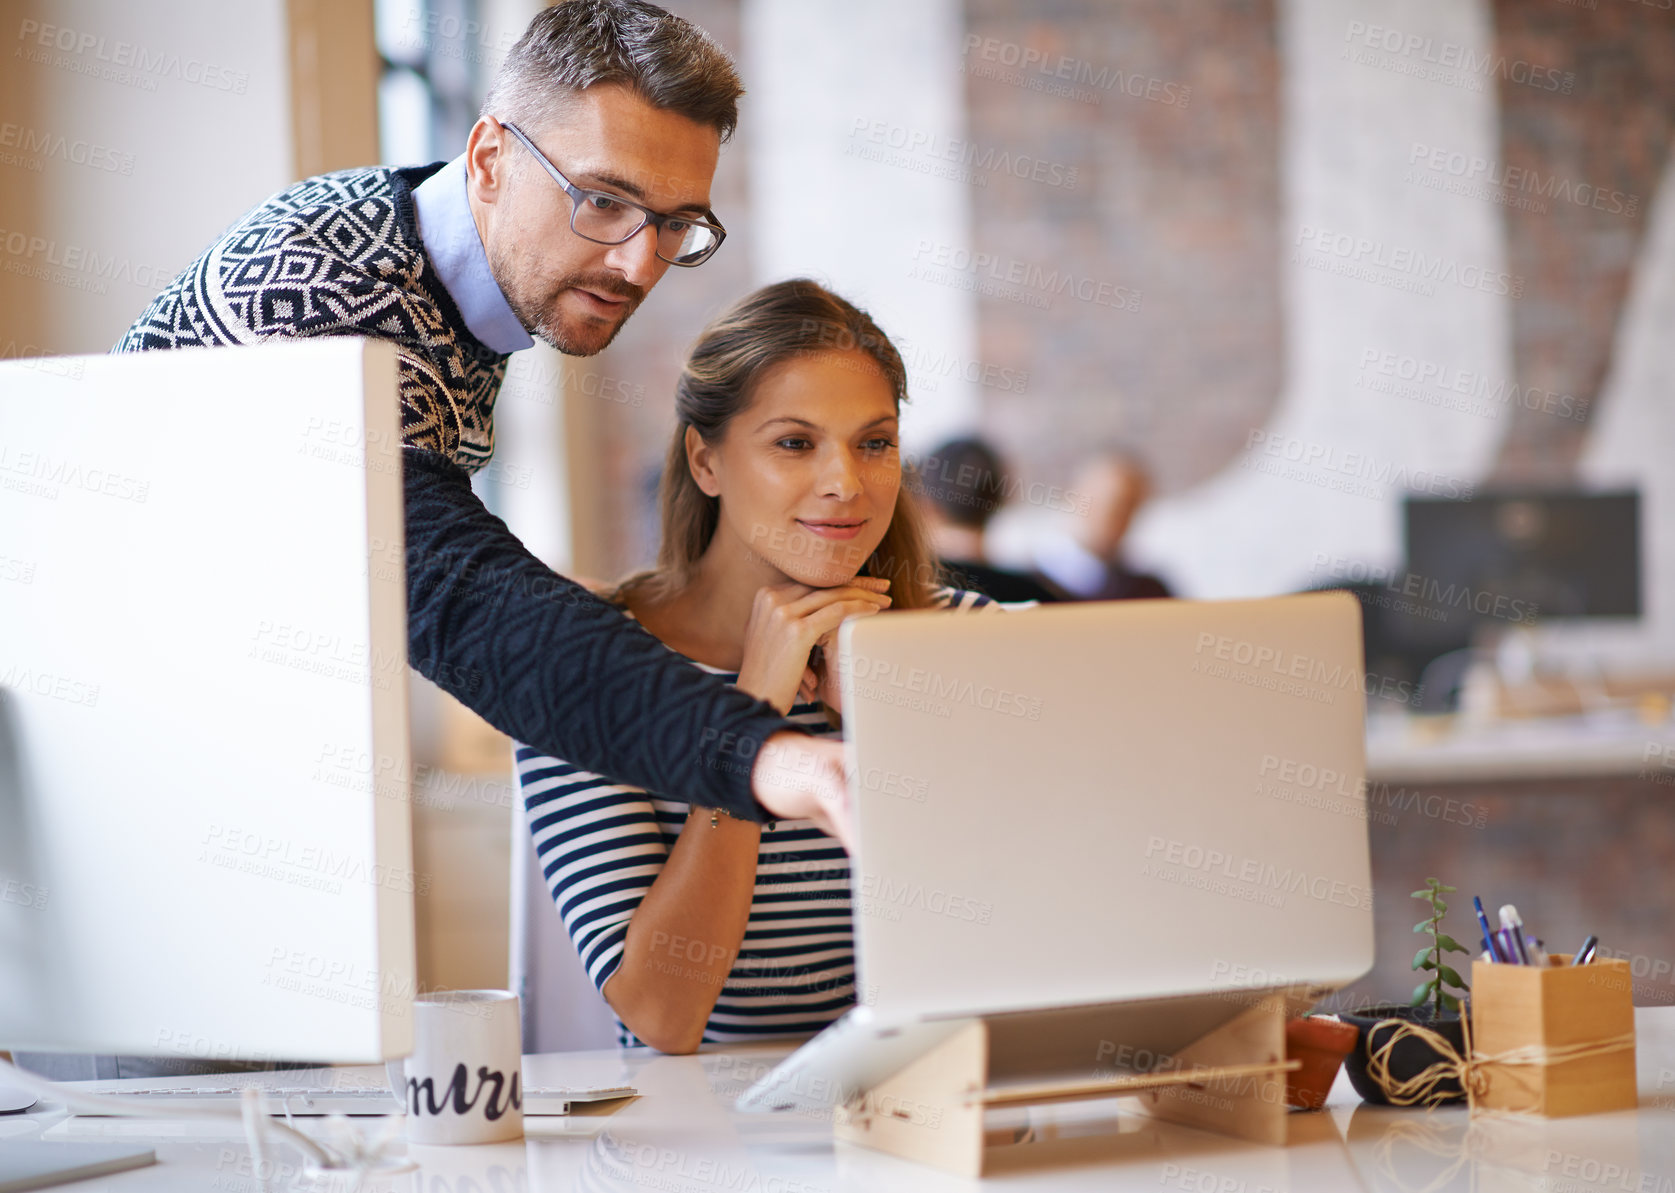 Buy stock photo Shot of two designers working together at a computer